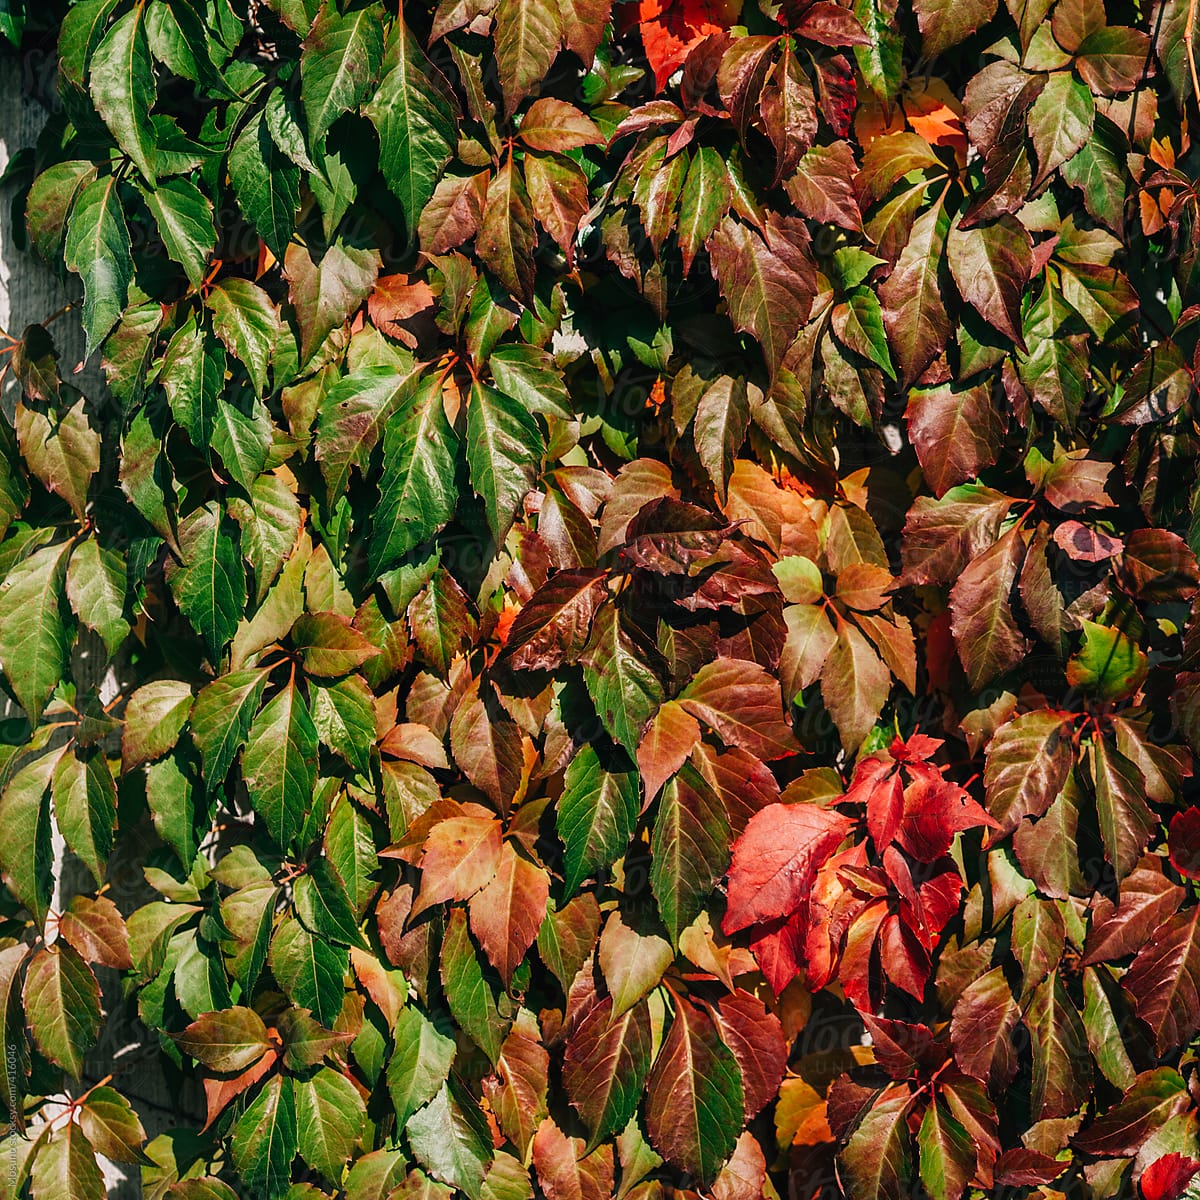 "Colourful Leaves As A Background" by Stocksy Contributor "Mosuno